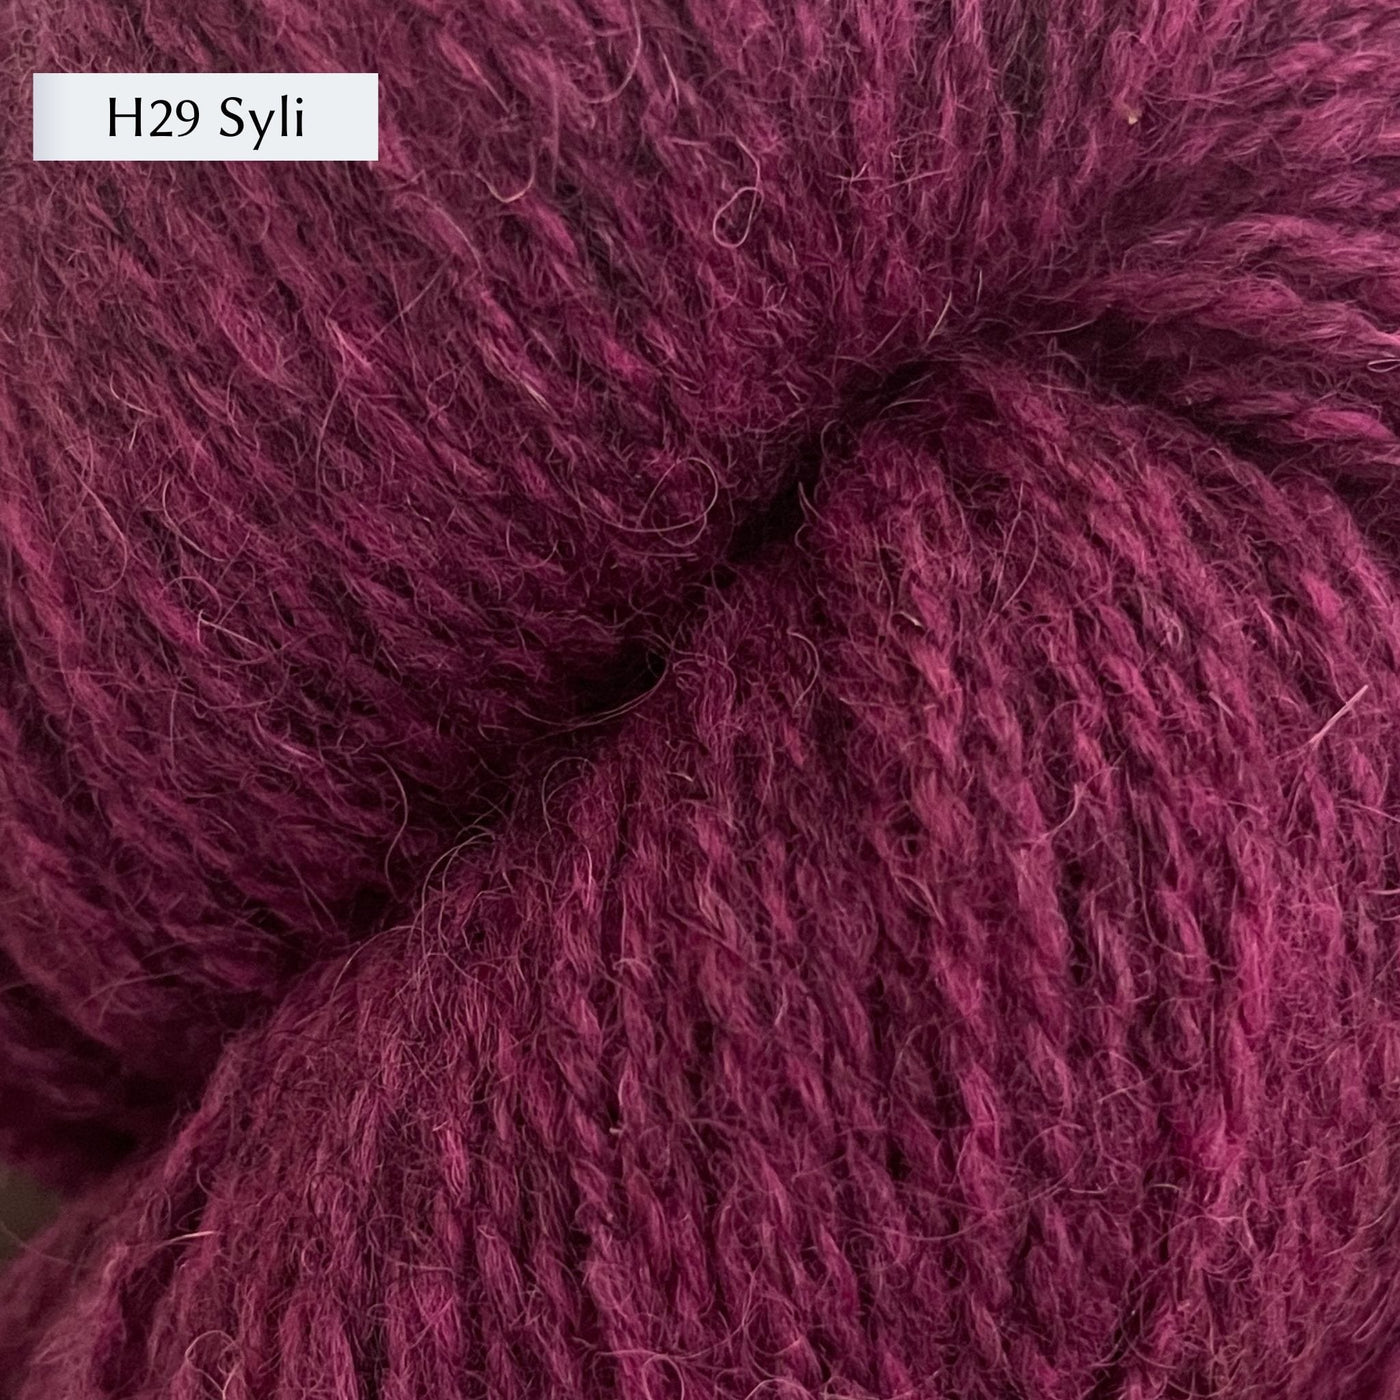 Tukuwool DK Yarn, 100% Finnish Wool shown in colorway H29 Syli which is a bright heathered pink color. 